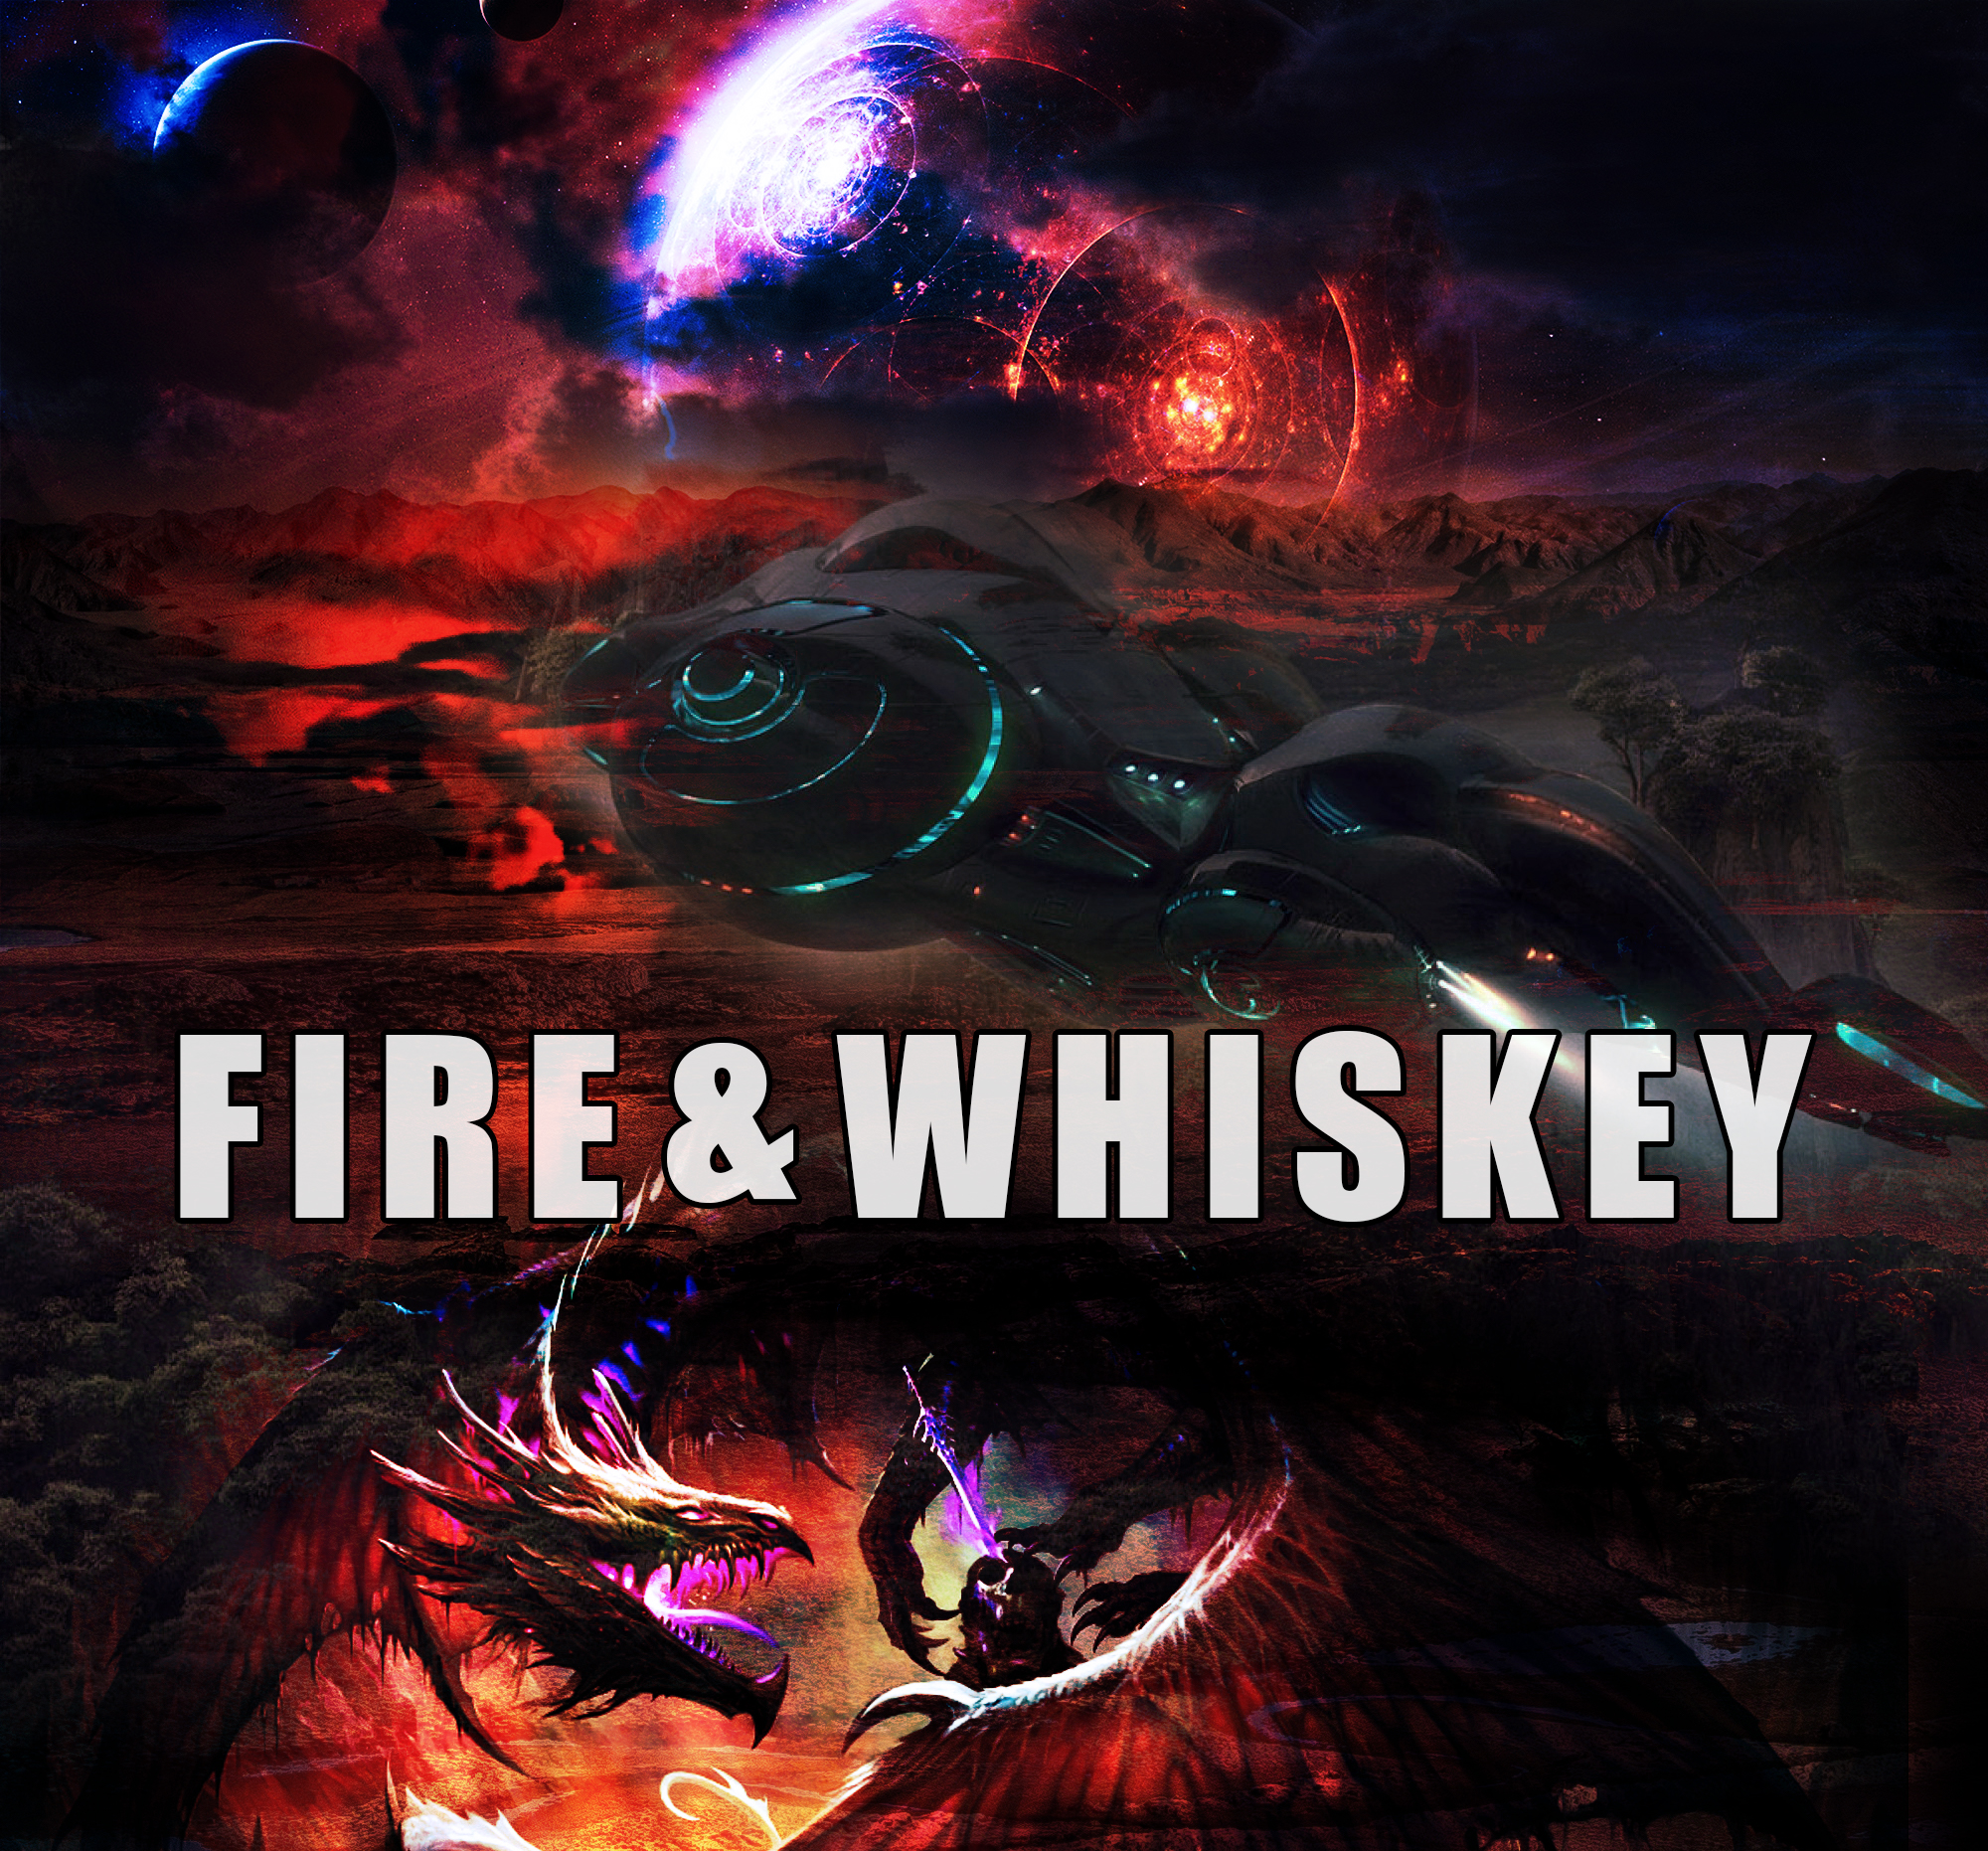 FIRE & WHISKEY